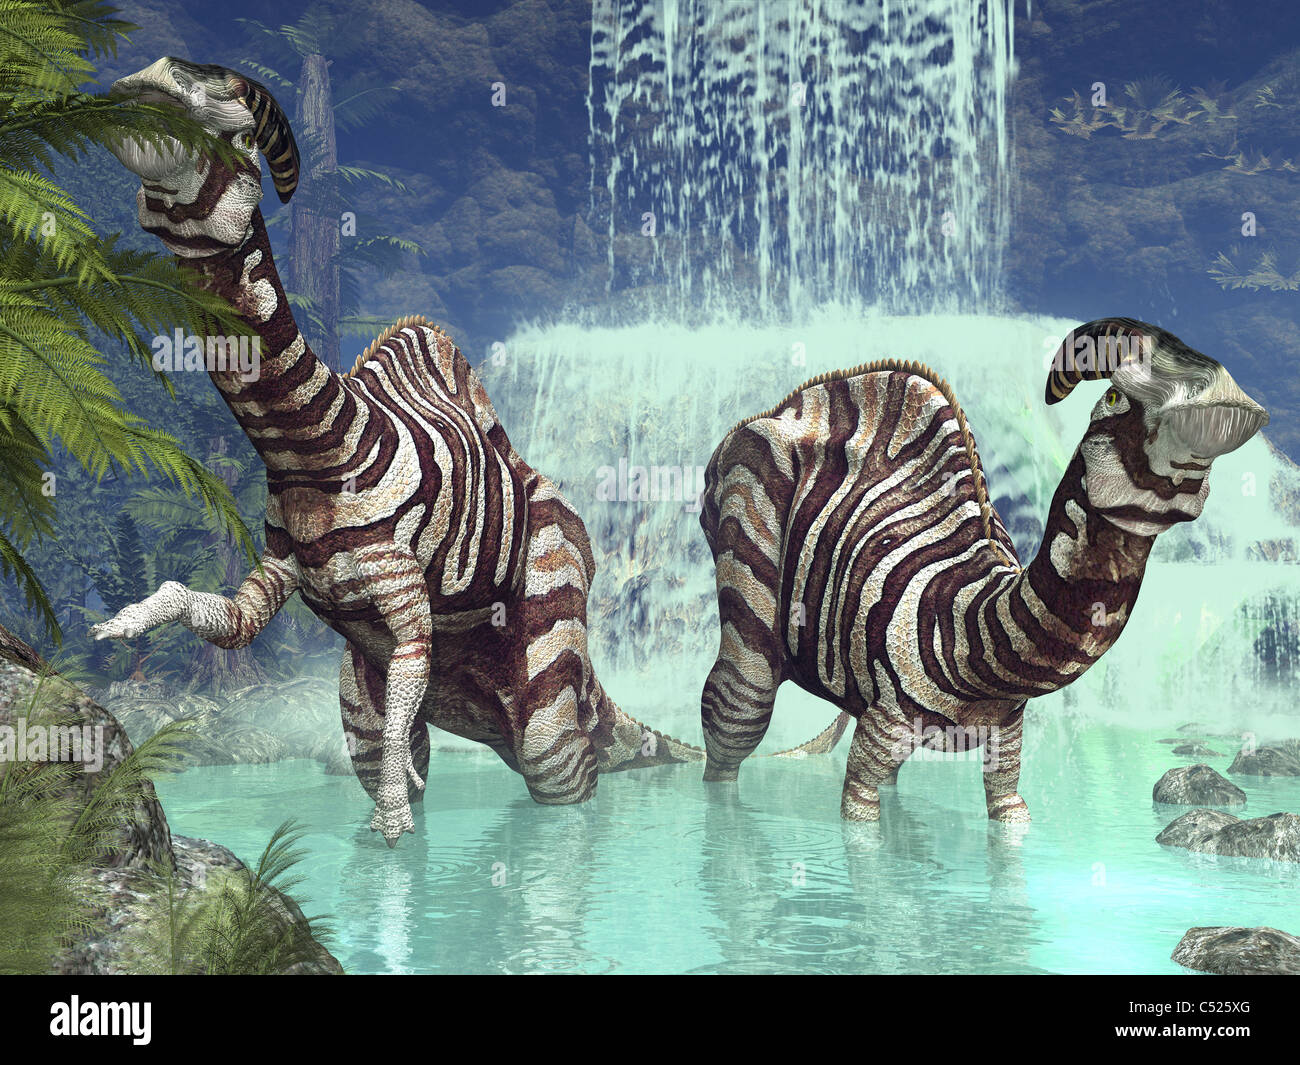 A pair of Parasaurolophus feed on flora near a waterfall. Stock Photo